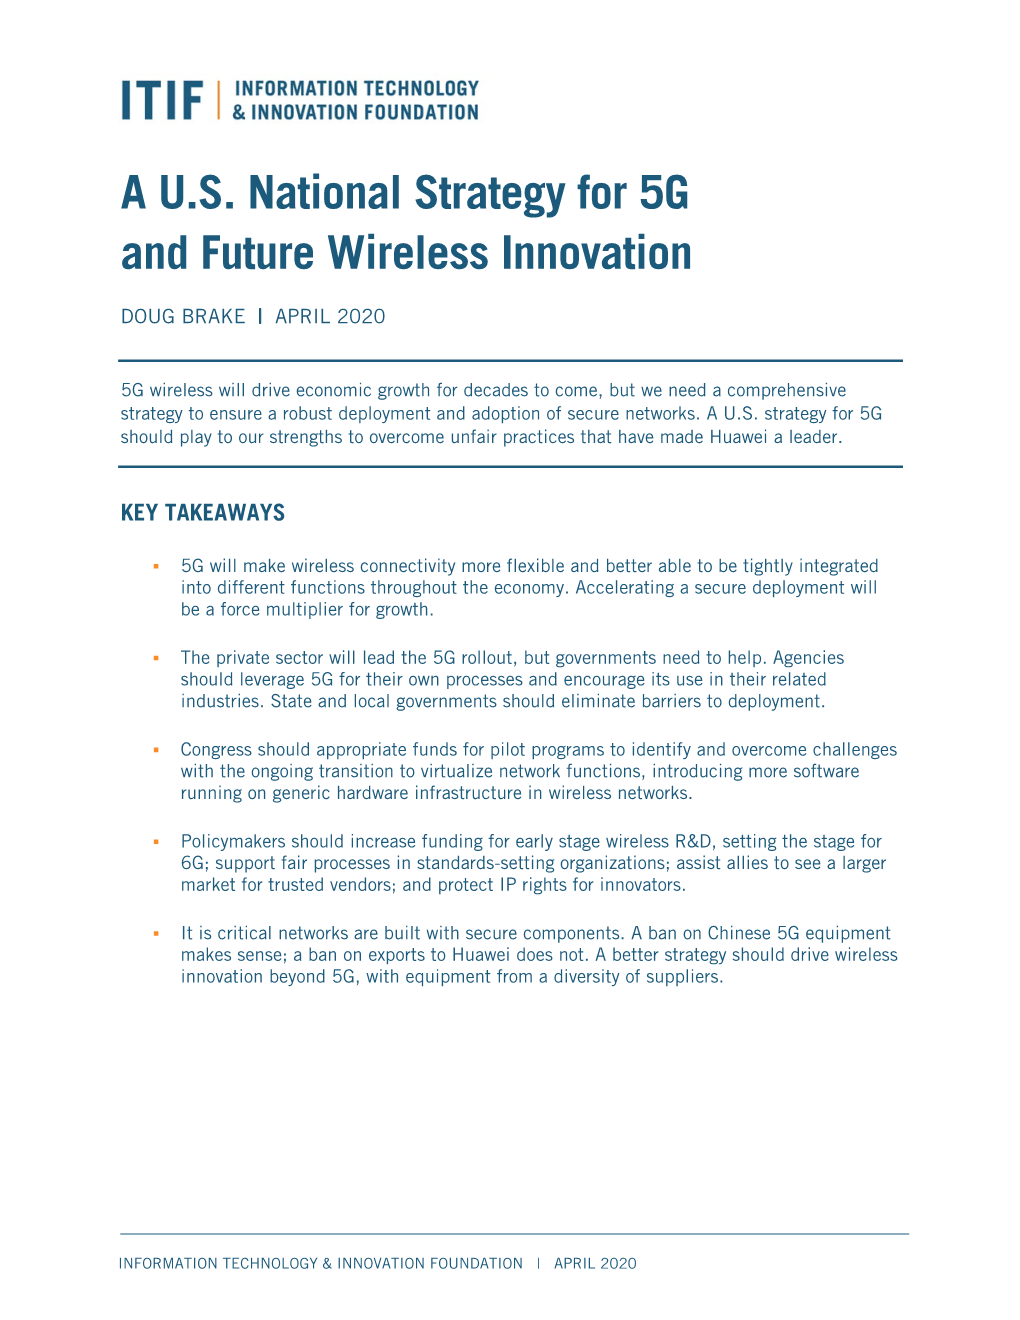 A U.S. National Strategy for 5G and Future Wireless Innovation